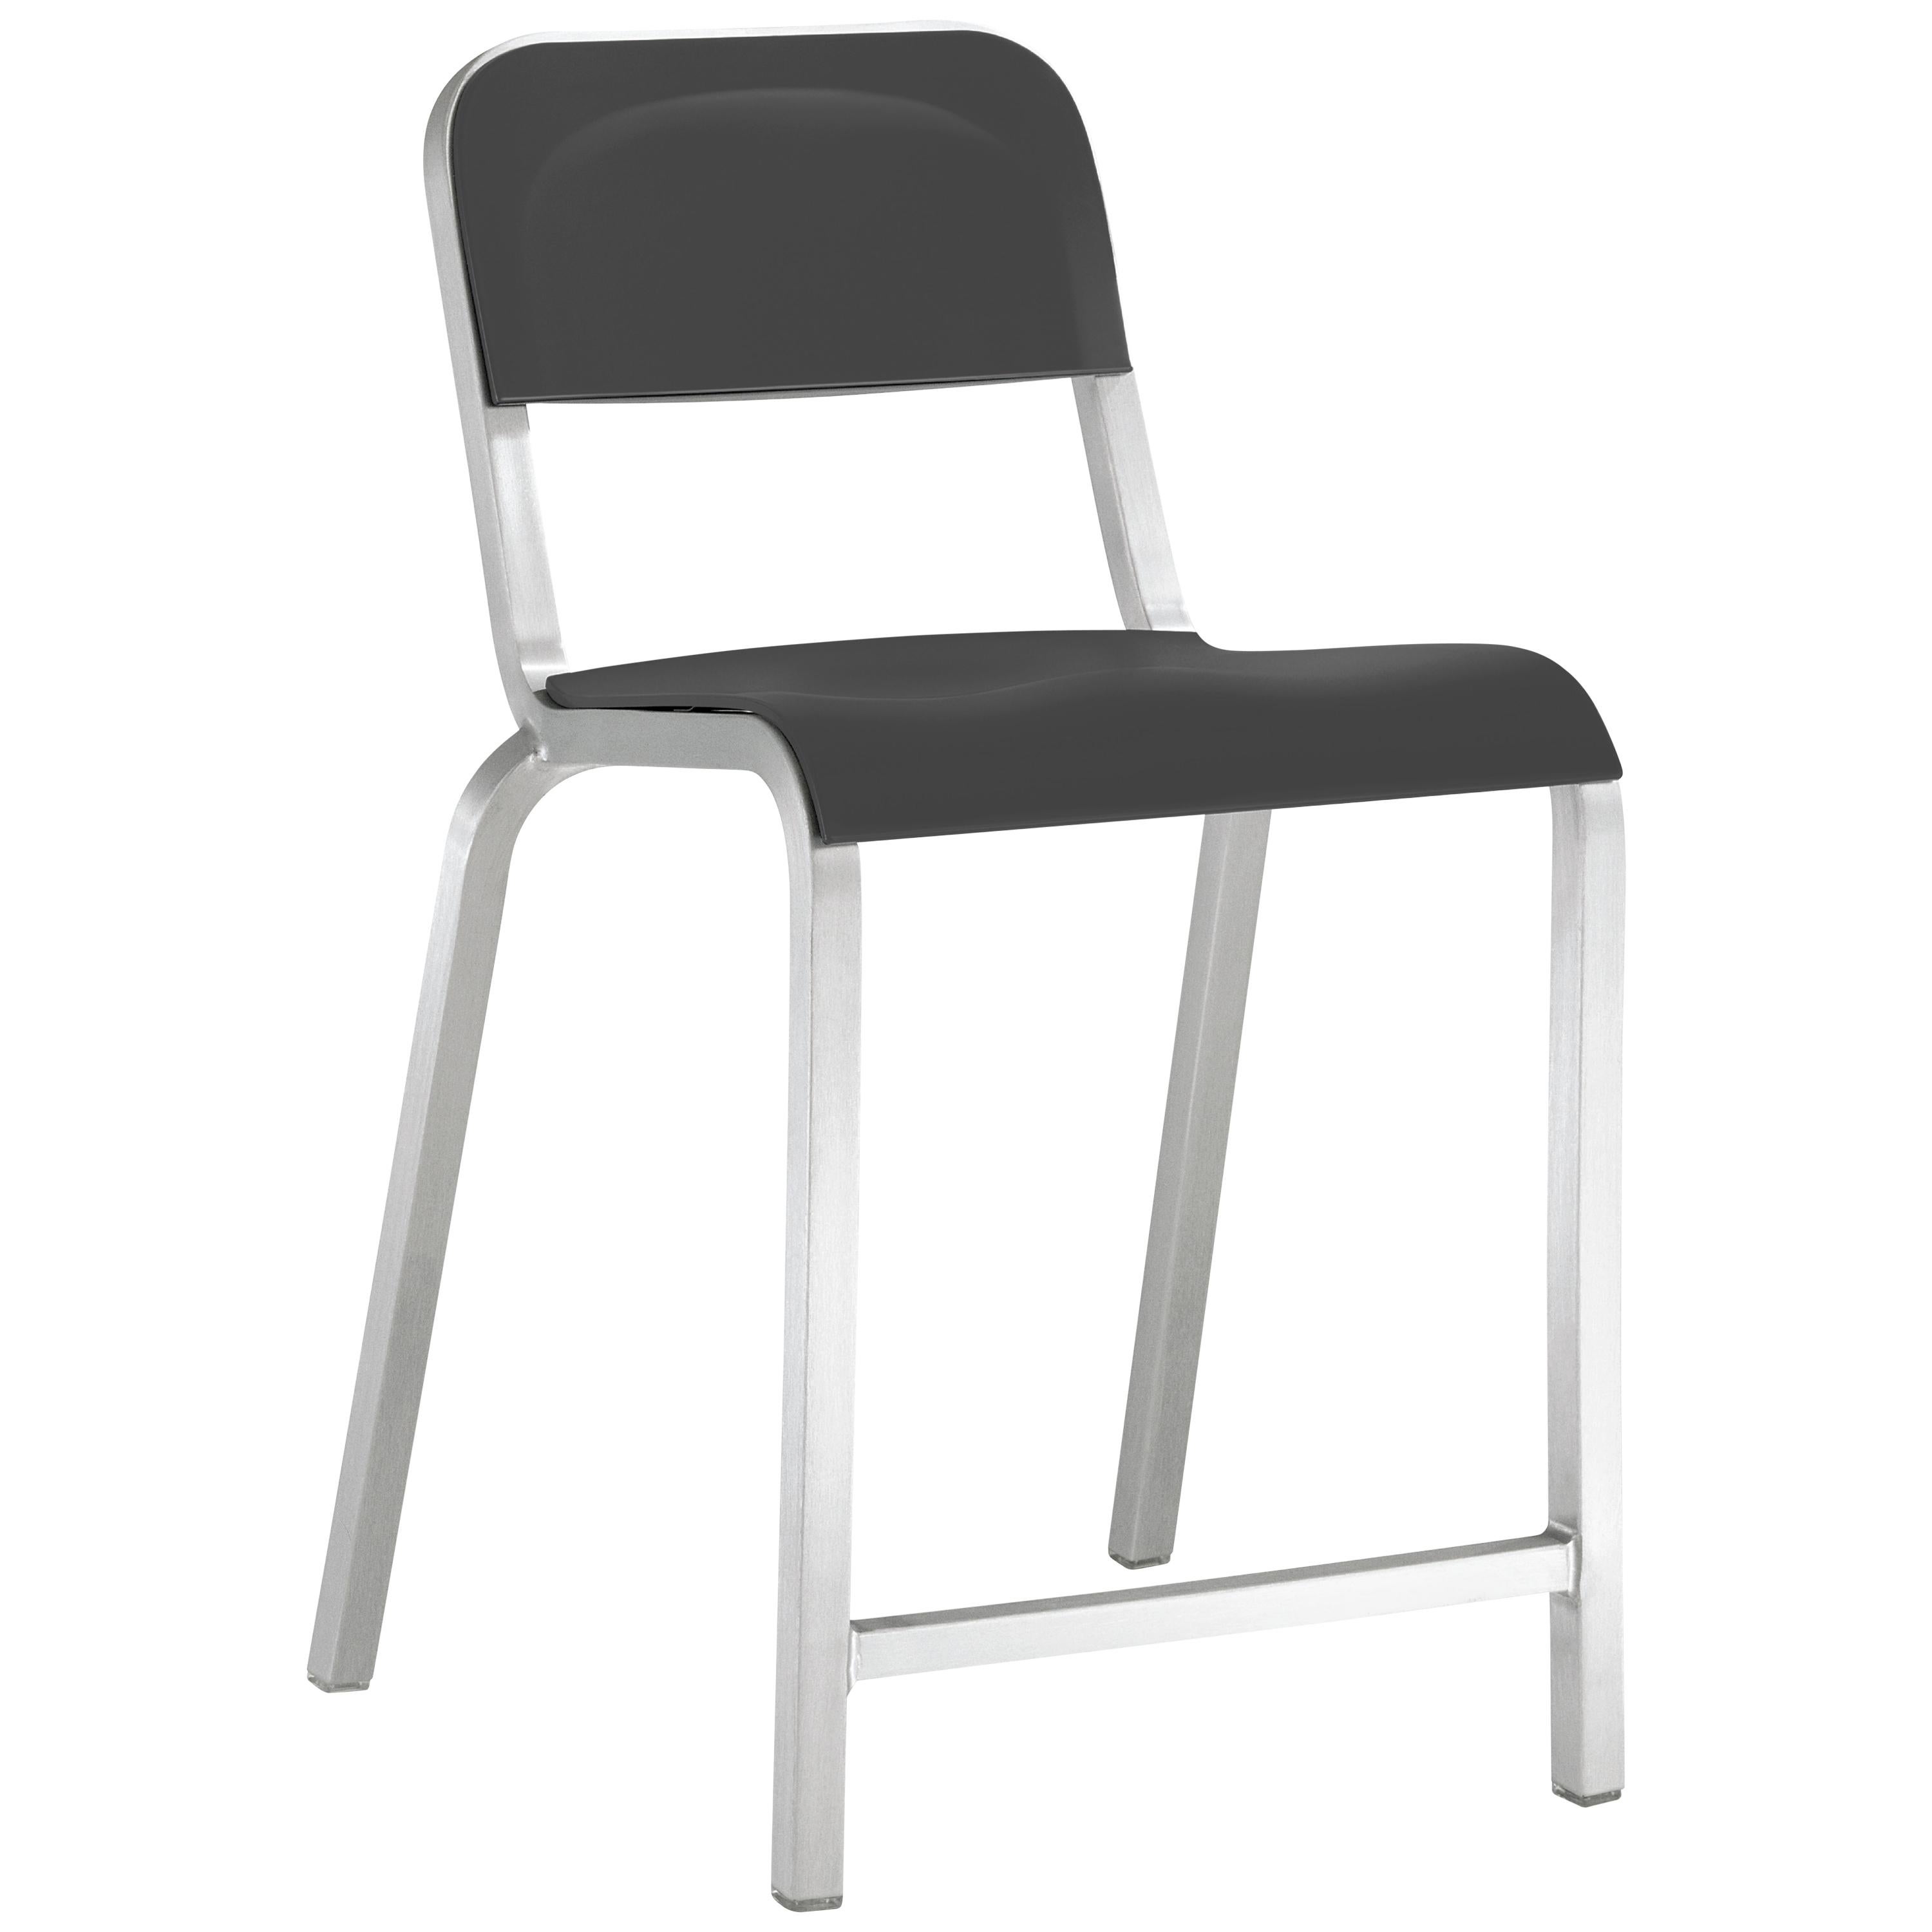 Emeco 1951 Aluminum Counter Stool with Lava Black Seat by Adrian Van Hooydonk For Sale